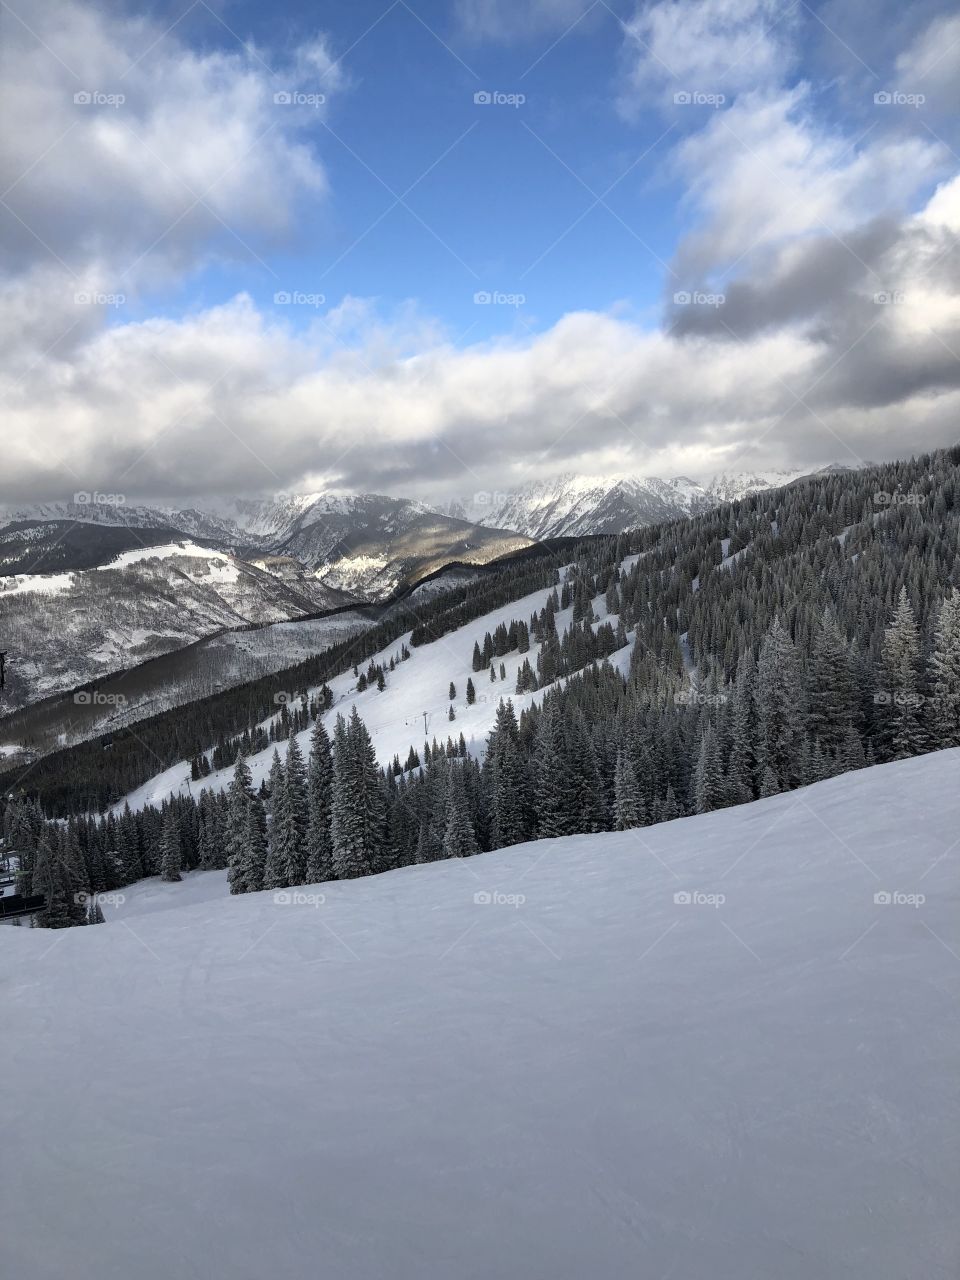 Chairlift views from a beautiful snow day on January 11, 2018 in Vail, Colorado its a cold morning. 